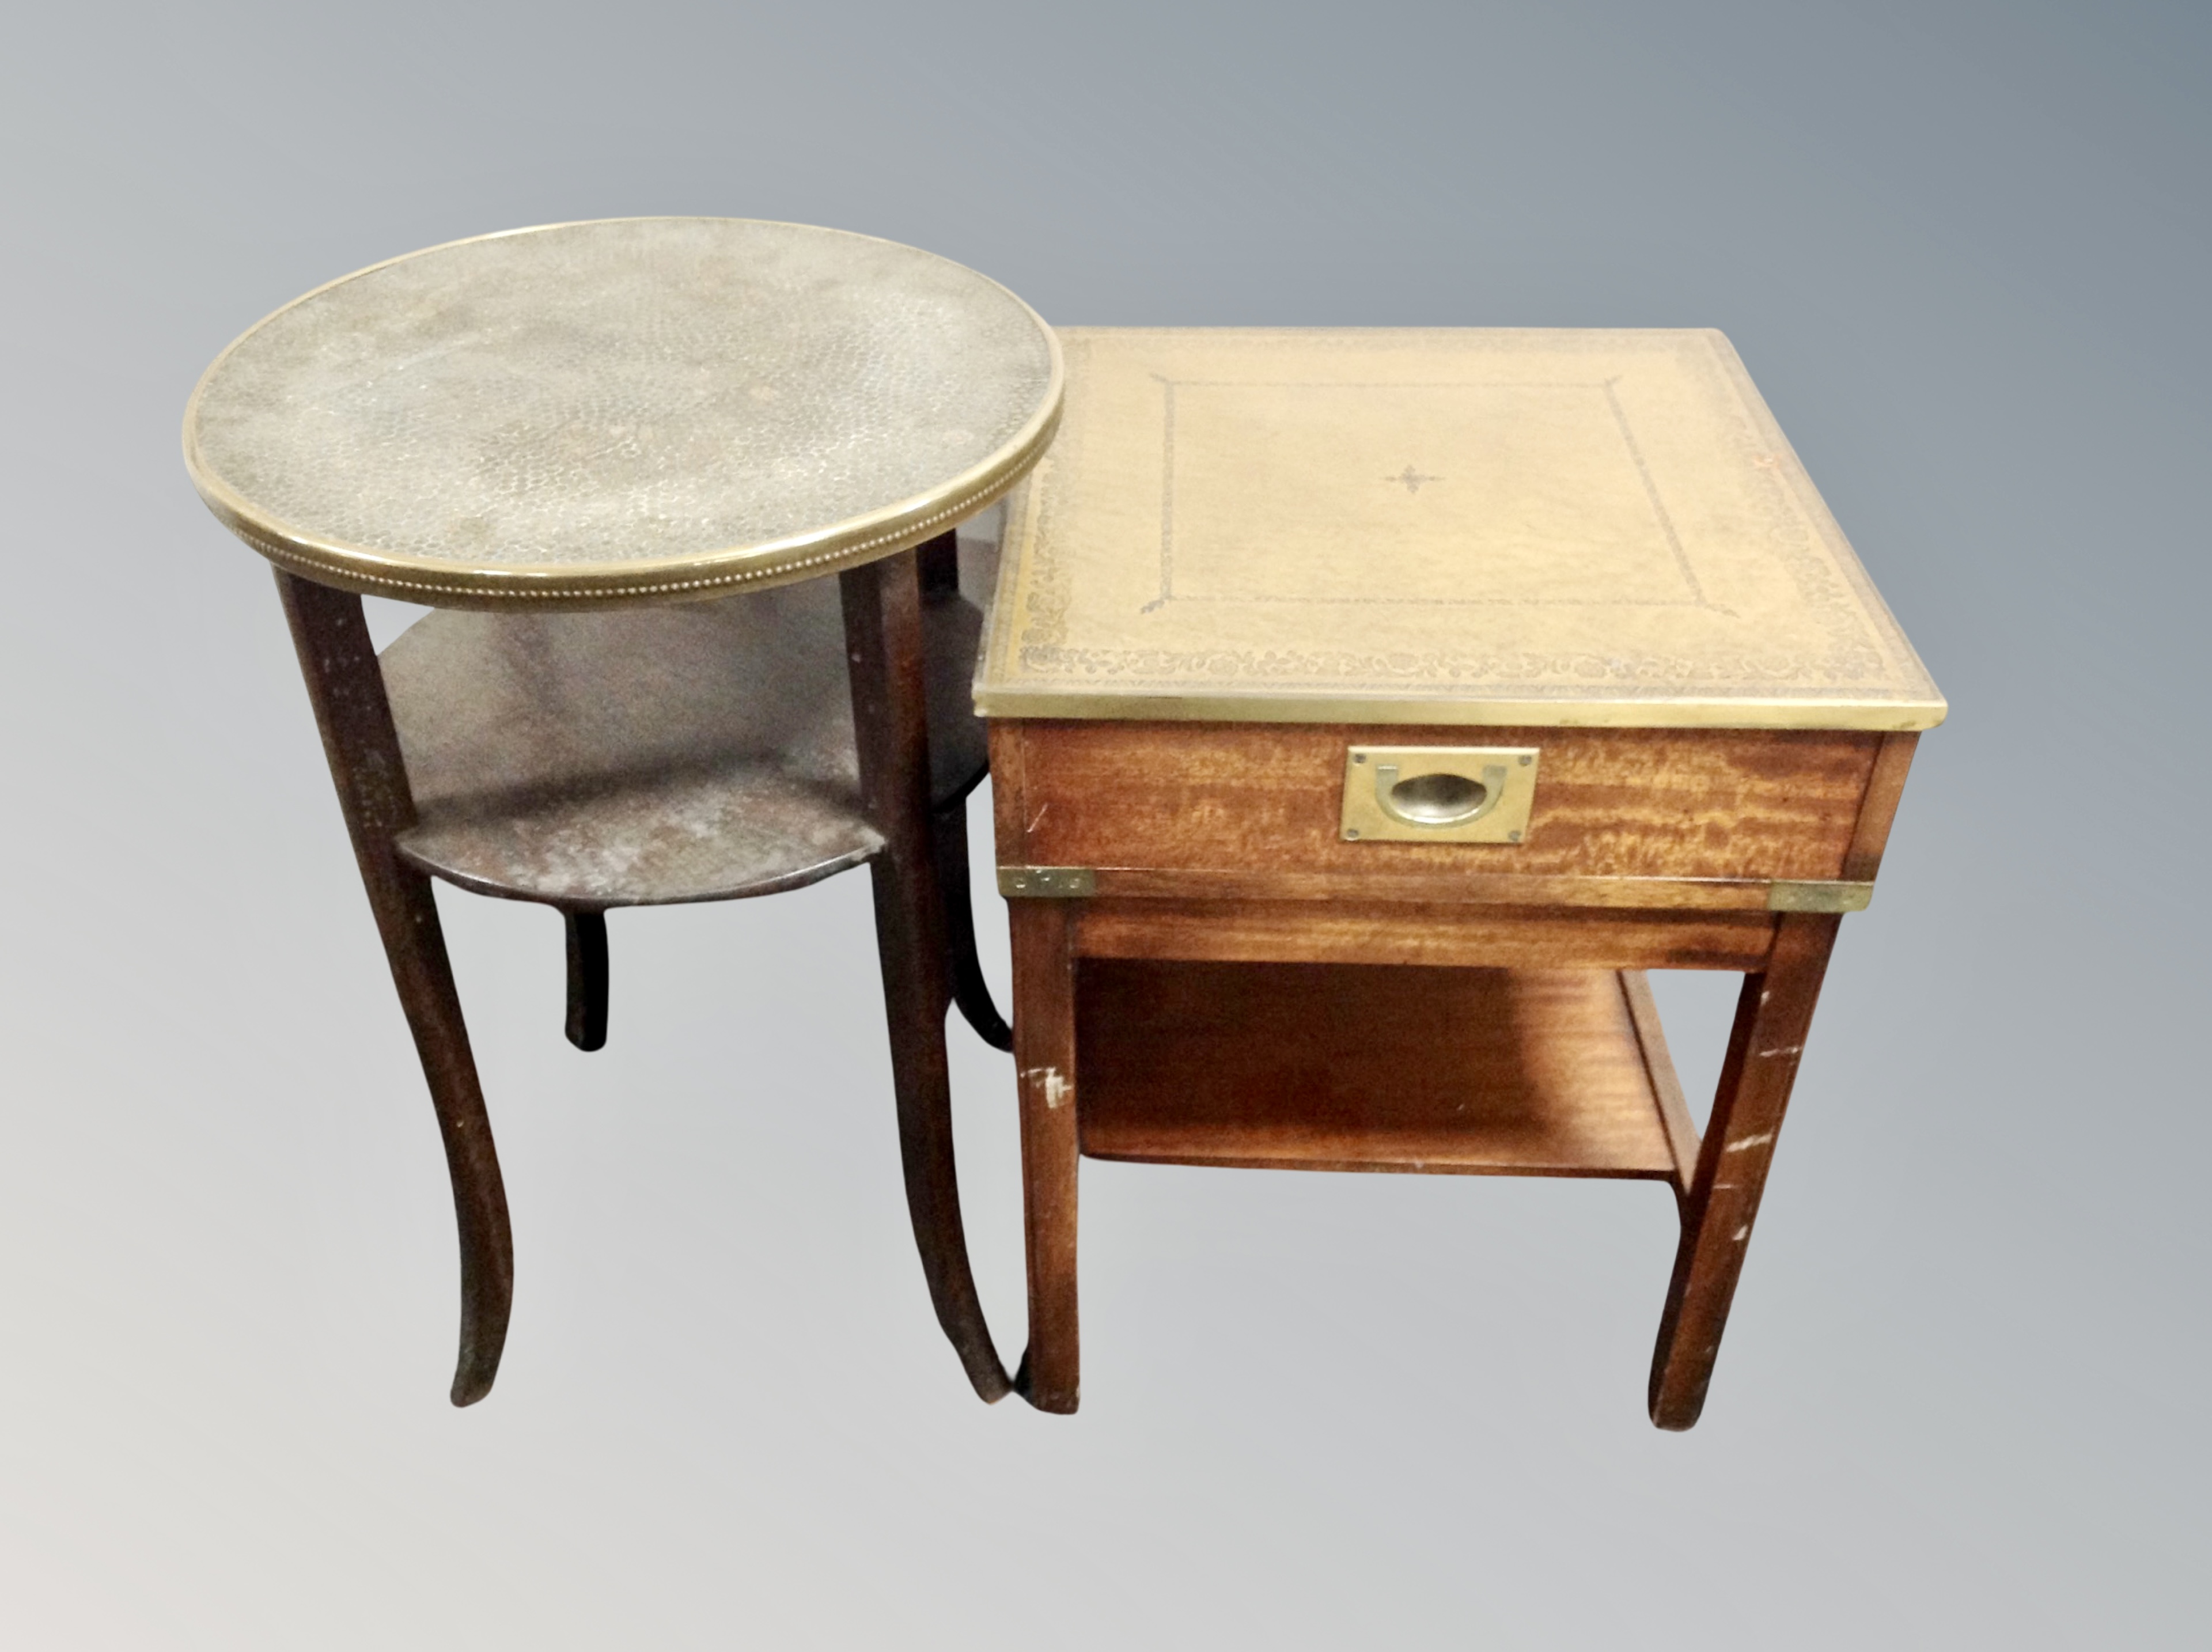 A campaign style lamp table with tooled leather inset panel,